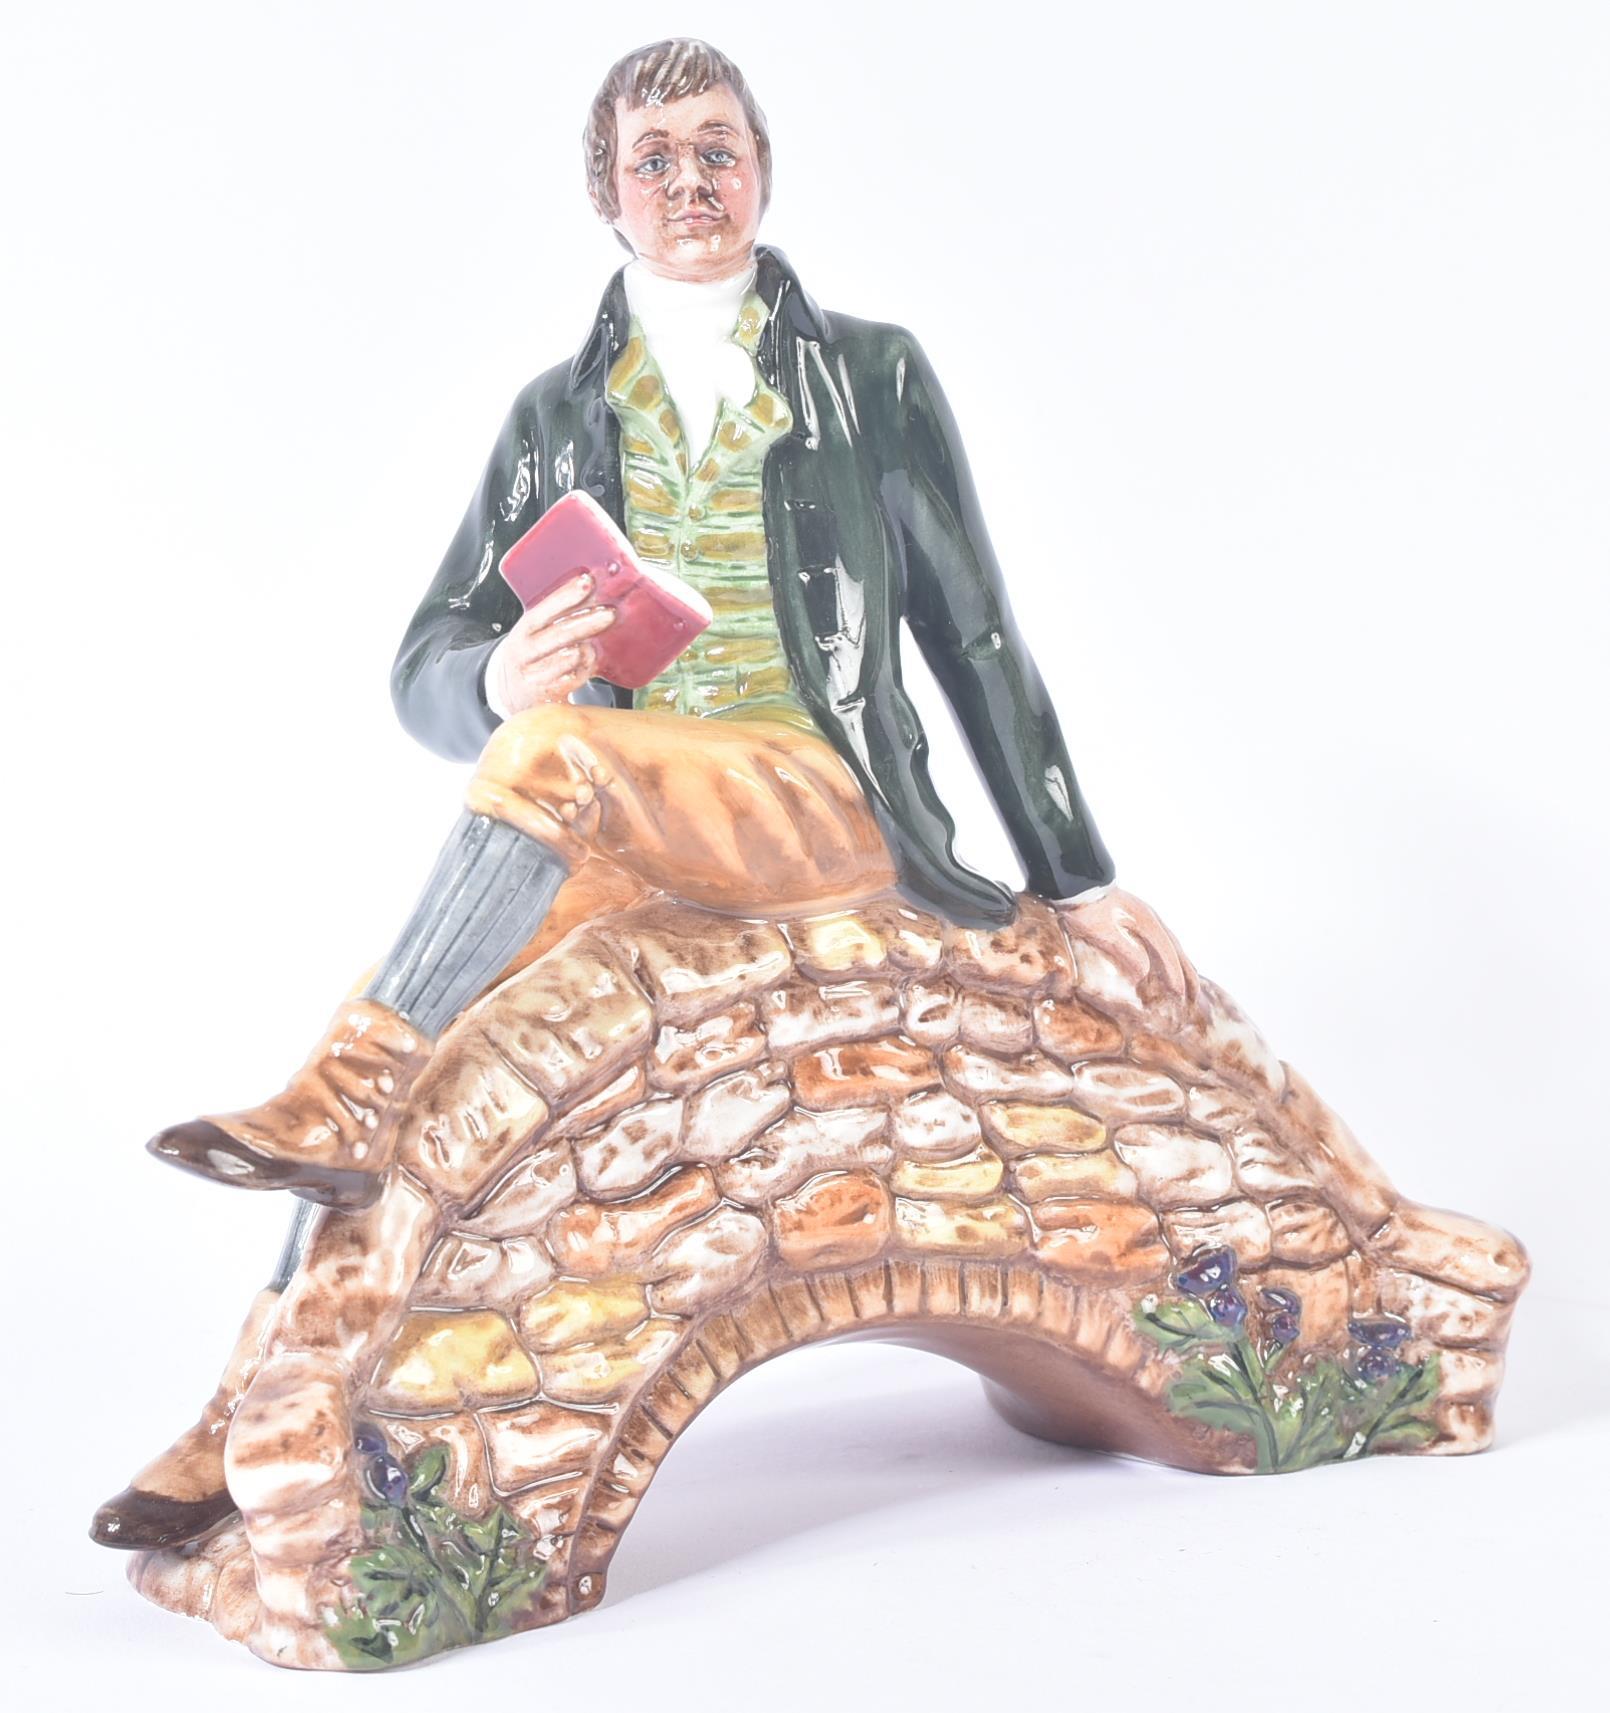 ROYAL DOULTON – ROBERT BURNS - FROM A PRIVATE COLLECTION